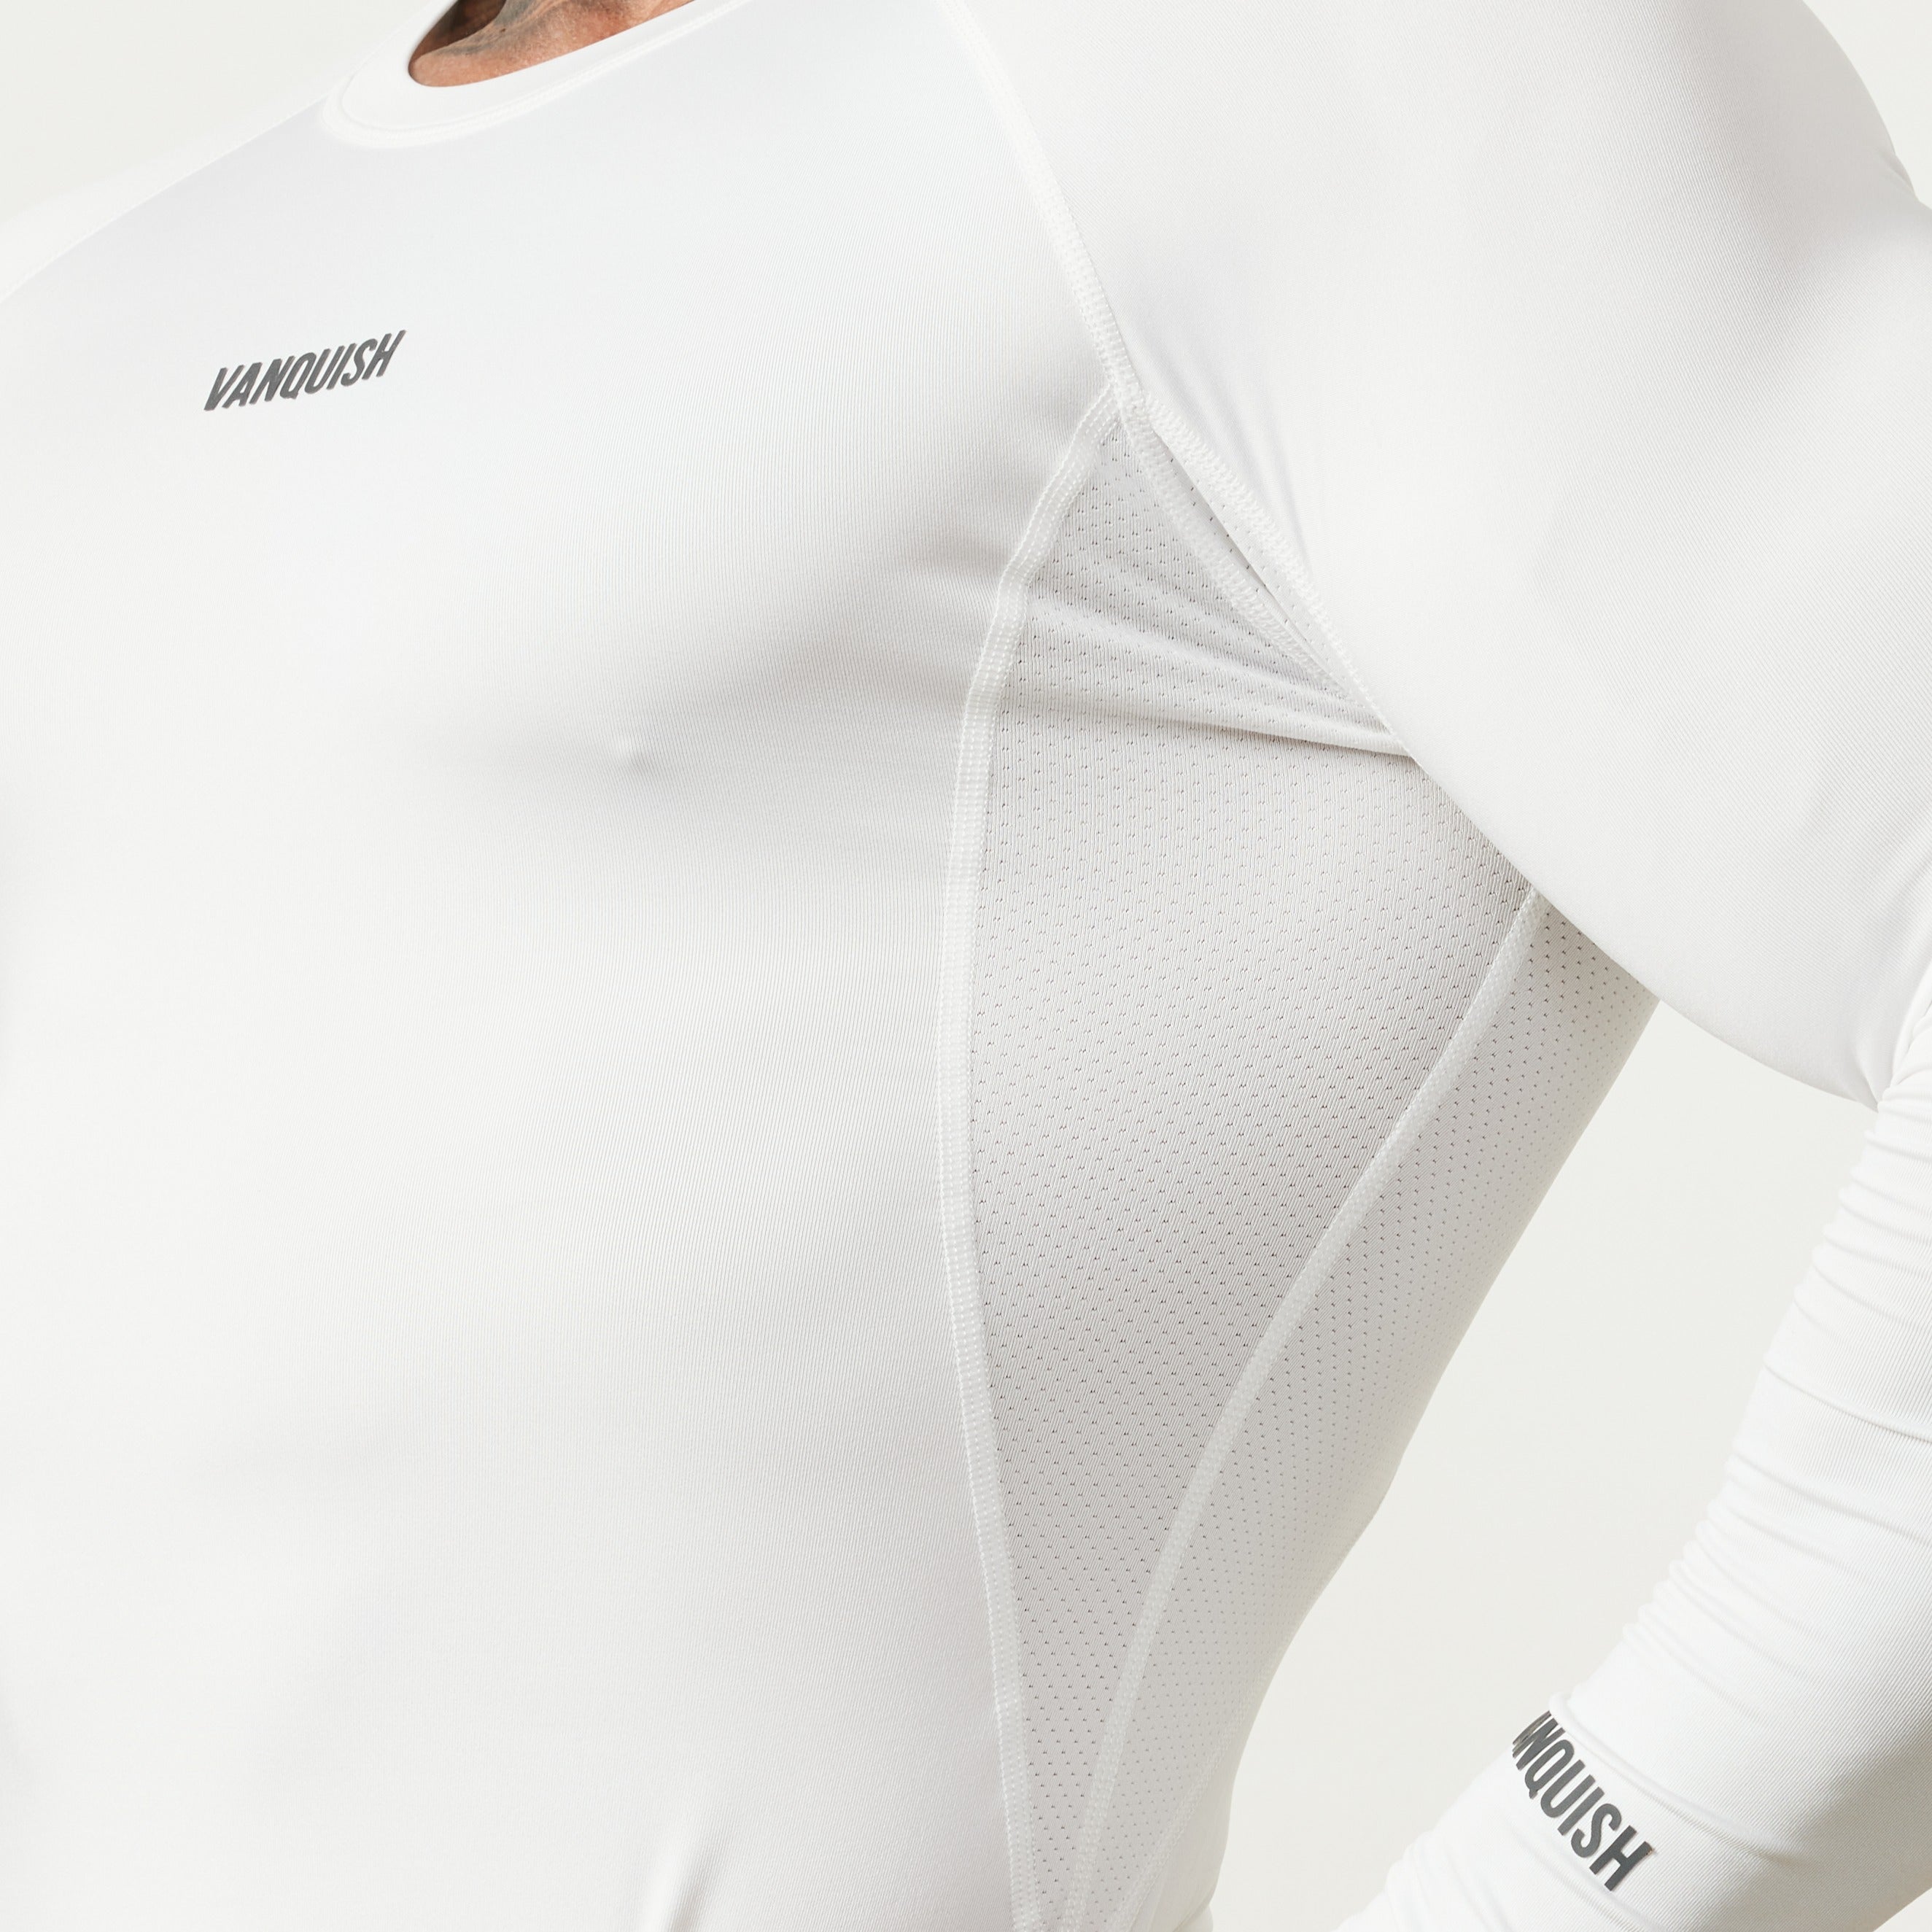 Vanquish Utility White Long Sleeve Base Layer Top